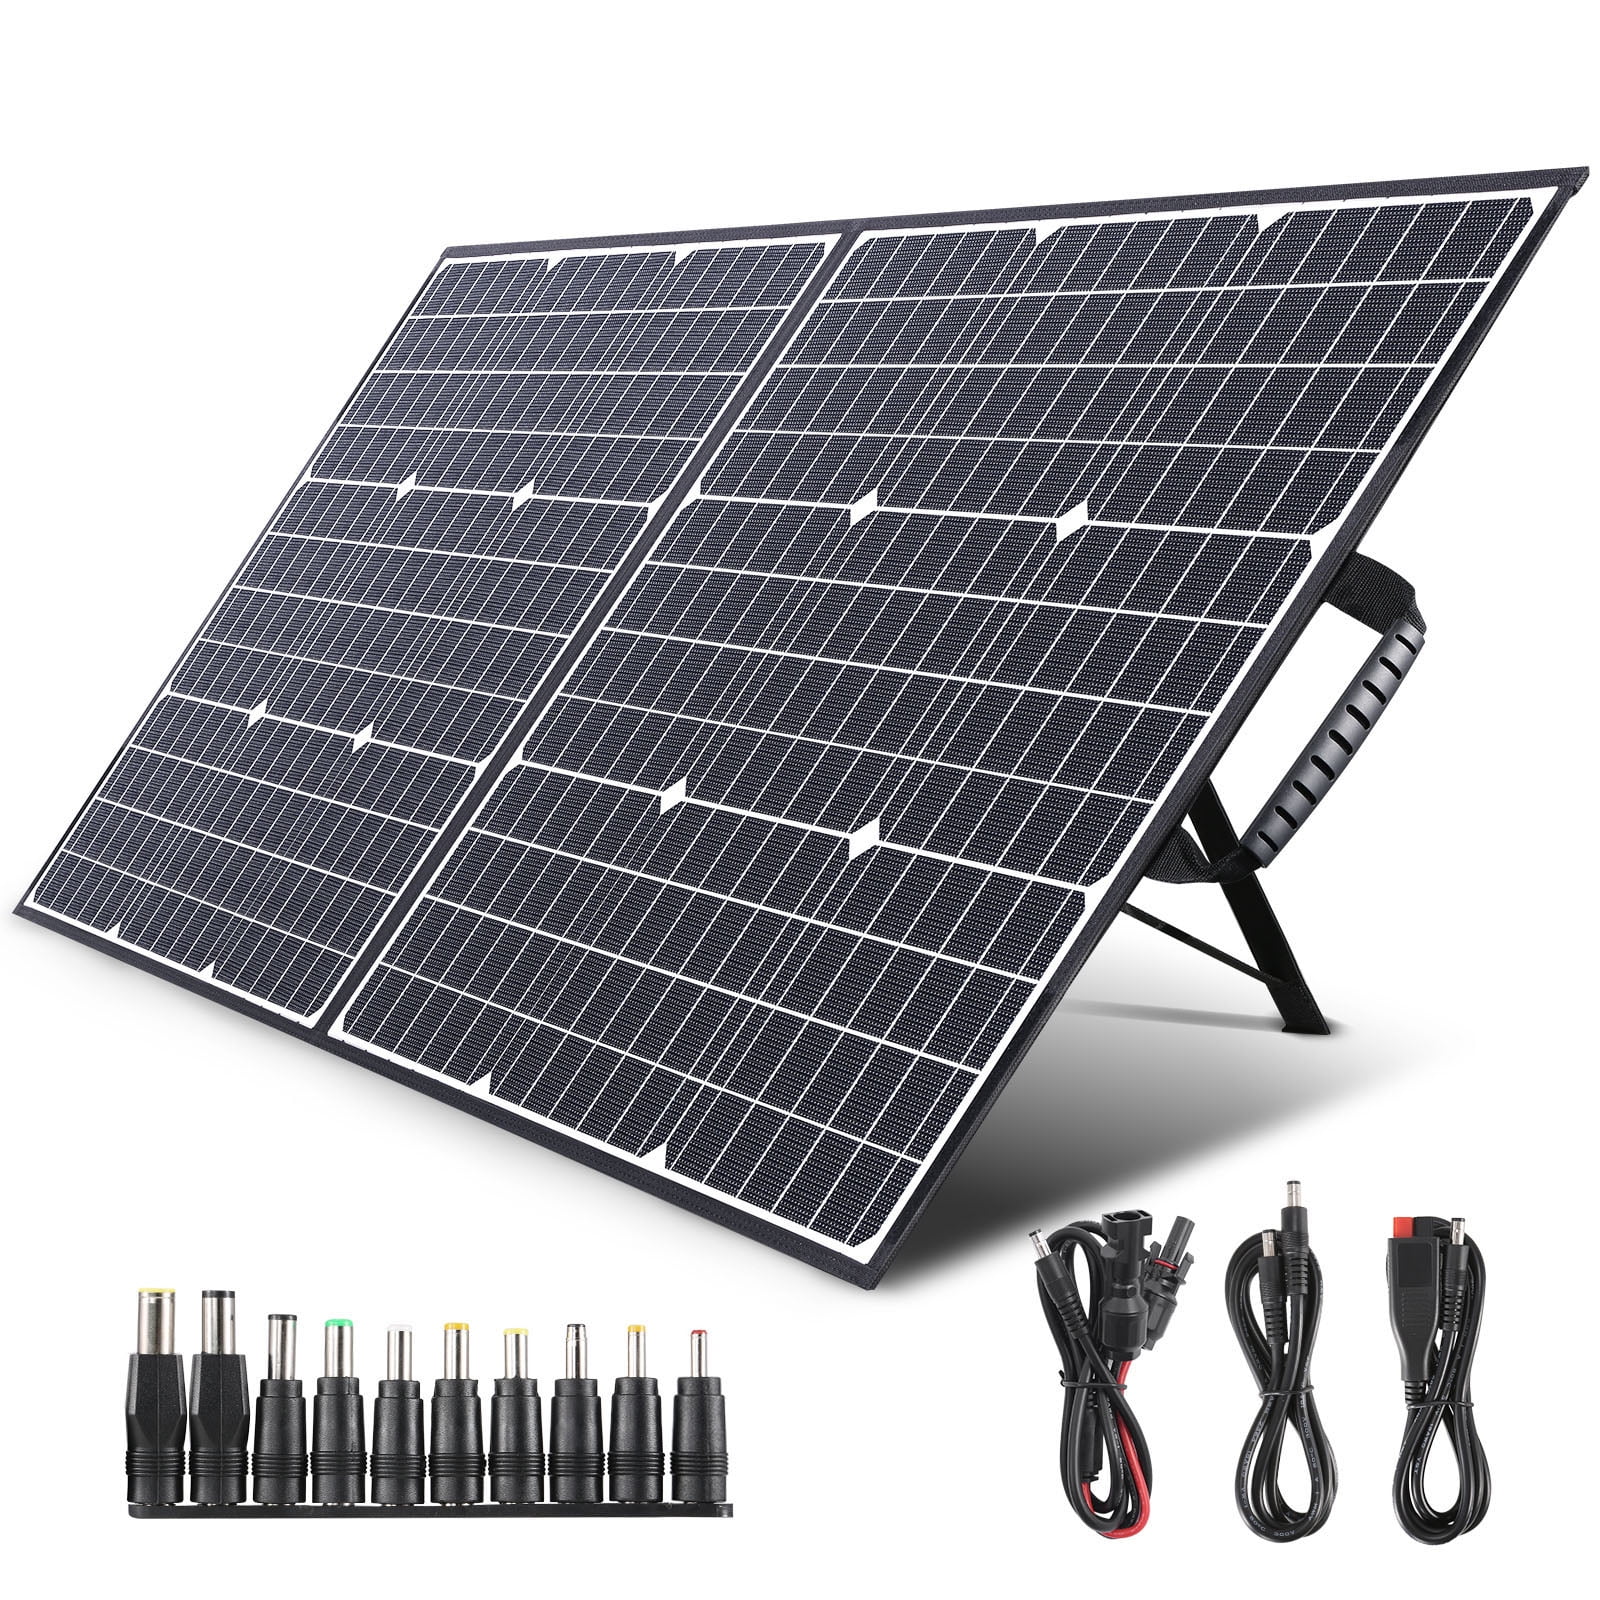 2USB and DC 18V 60w Portable Solar Panel Solar Panel with Kickstand Upgraded Foldable Solar Panel Charger for Power Station